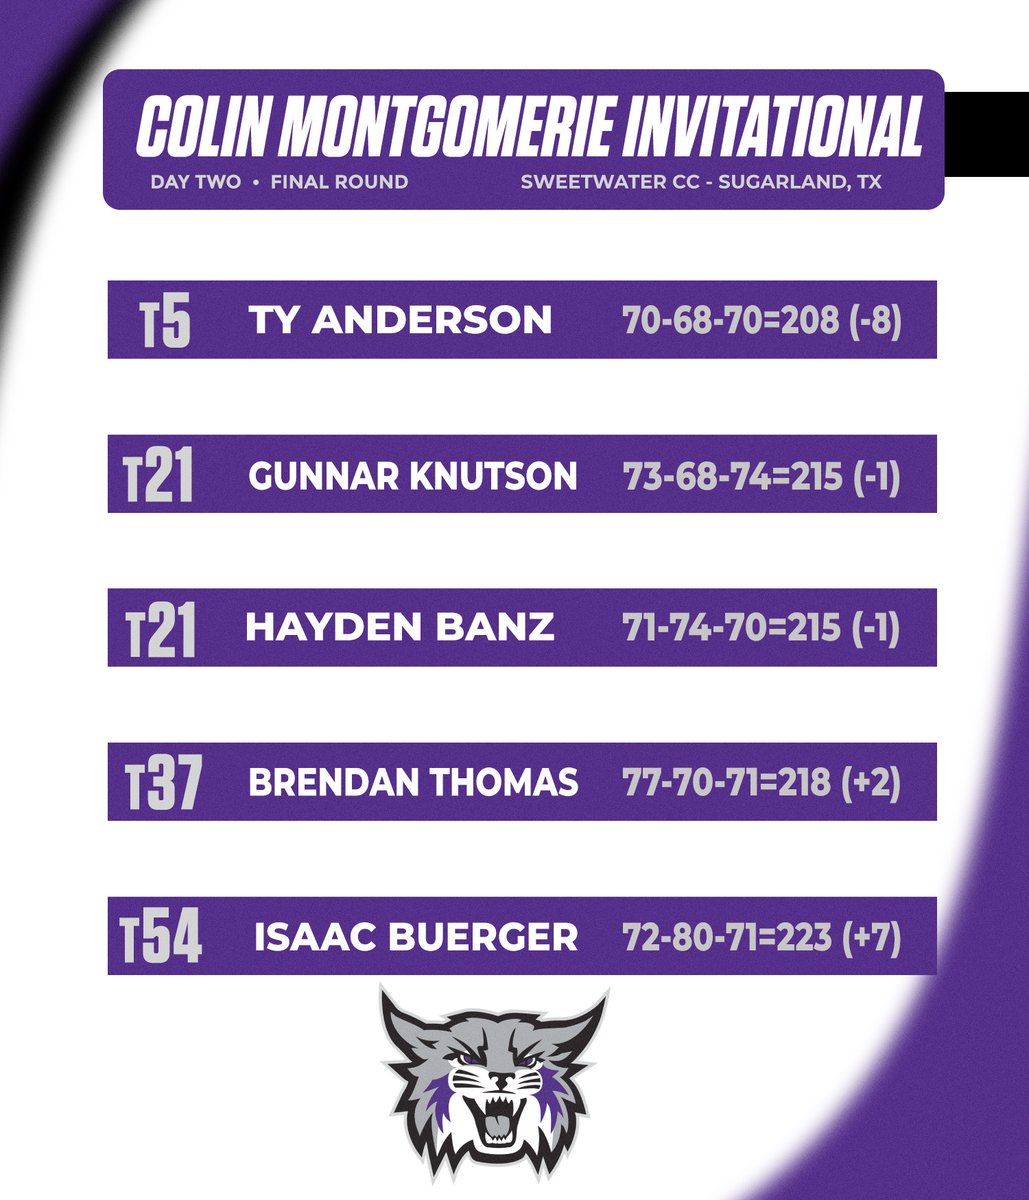 The 'Cats finish the Montgomerie Invite with another great round, finishing 2nd at 16-under par, just one off the lead. Fantastic way to open the spring season. Ty Anderson led WSU three players in the top-21, finishing tied for 5th with an 8-under 208. bit.ly/3Tyfs8N